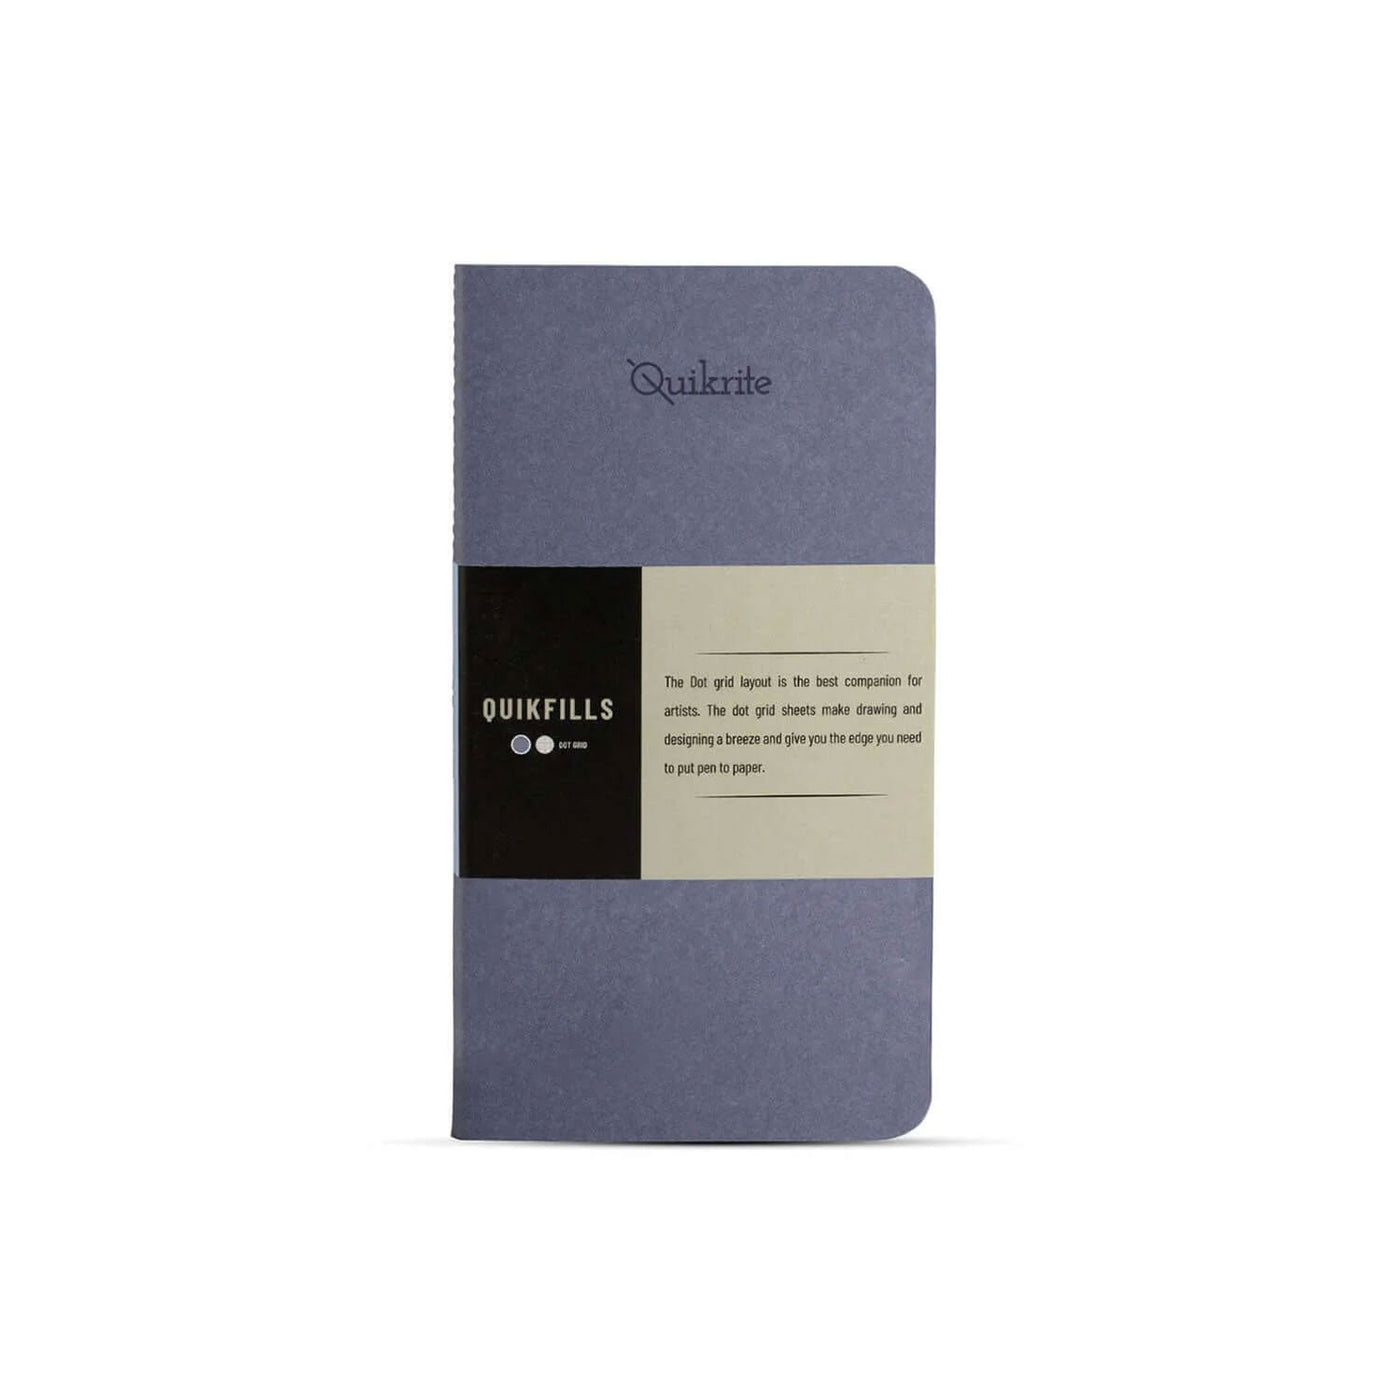 Pennline Quikfill Notebook Refill For Quikrite, Blue - Set Of 2 1